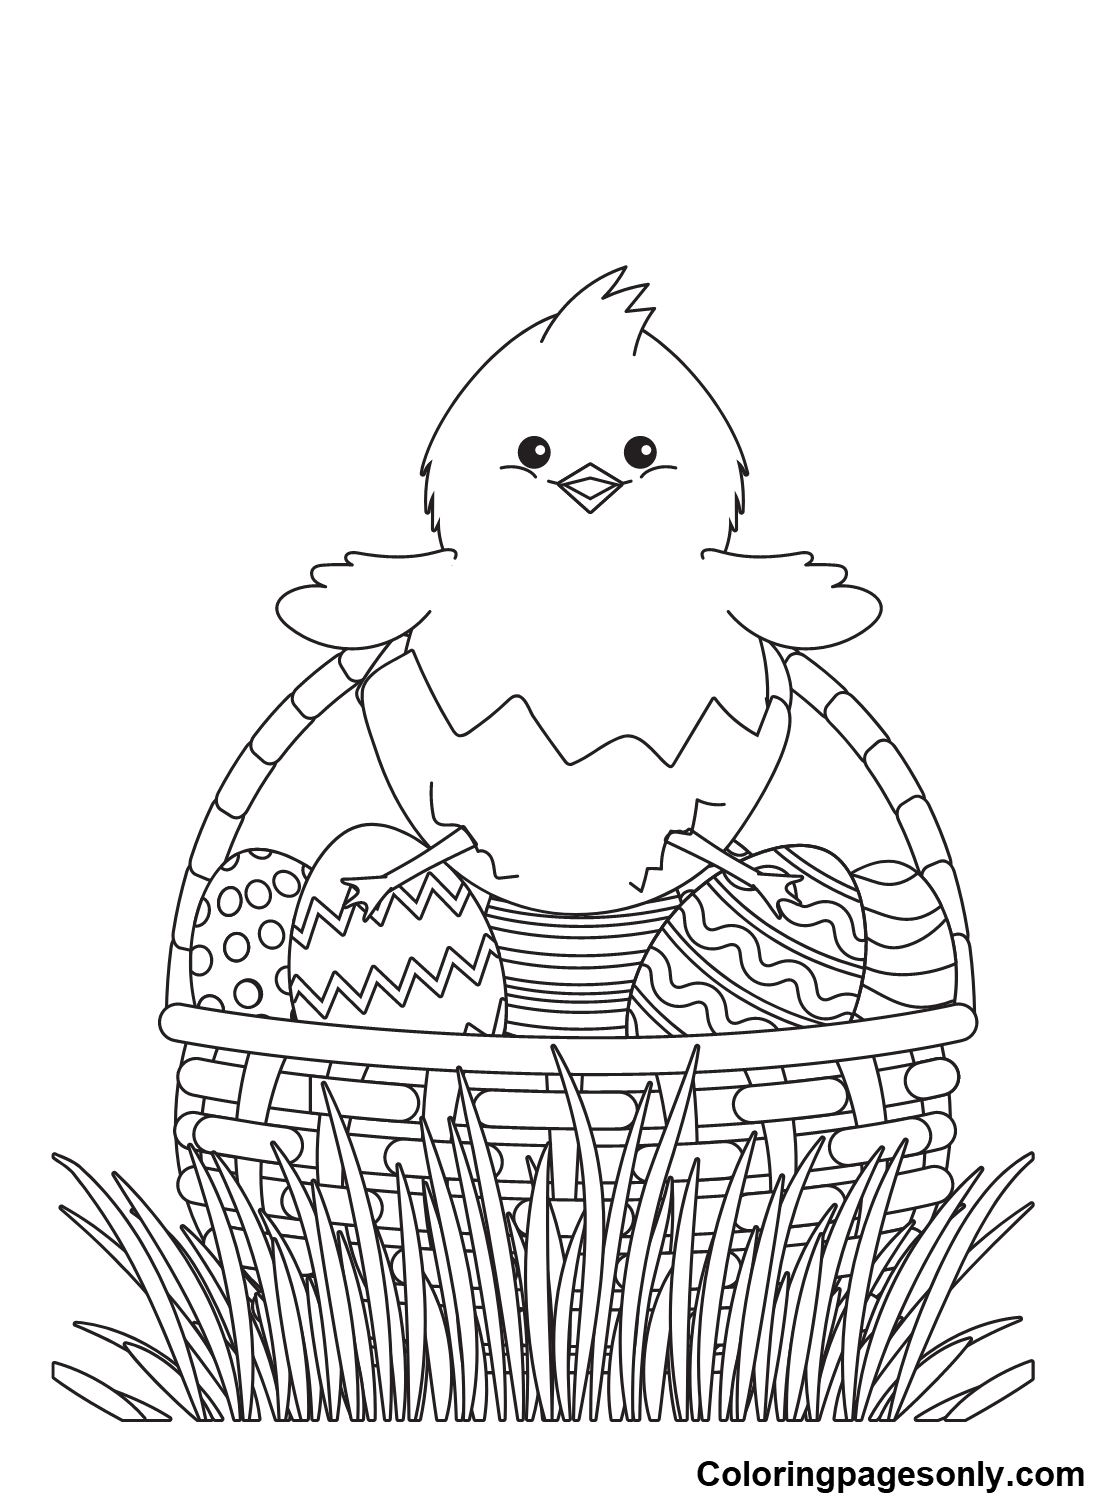 Easter Chick and Easter Basket Coloring Pages